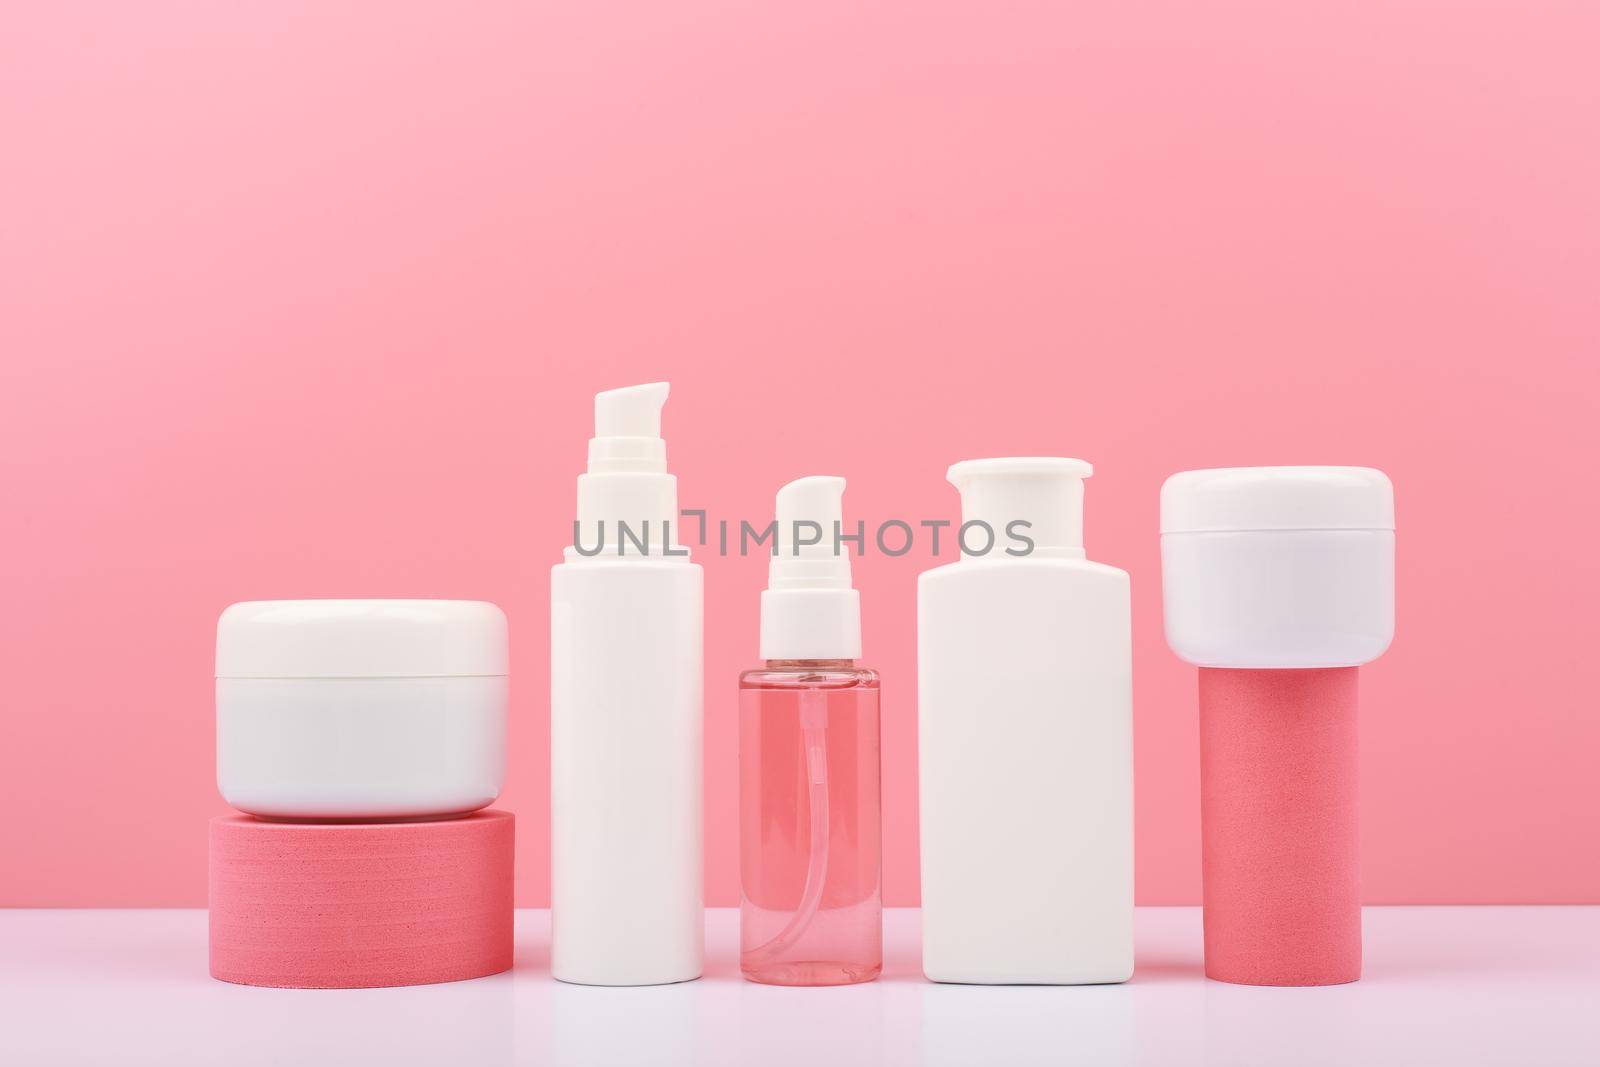 Trendy composition in pink colors with set of cosmetic bottles with beauty products on geometric props against pink background. Concept of organic cosmetics for anti acne or anti aging treatment